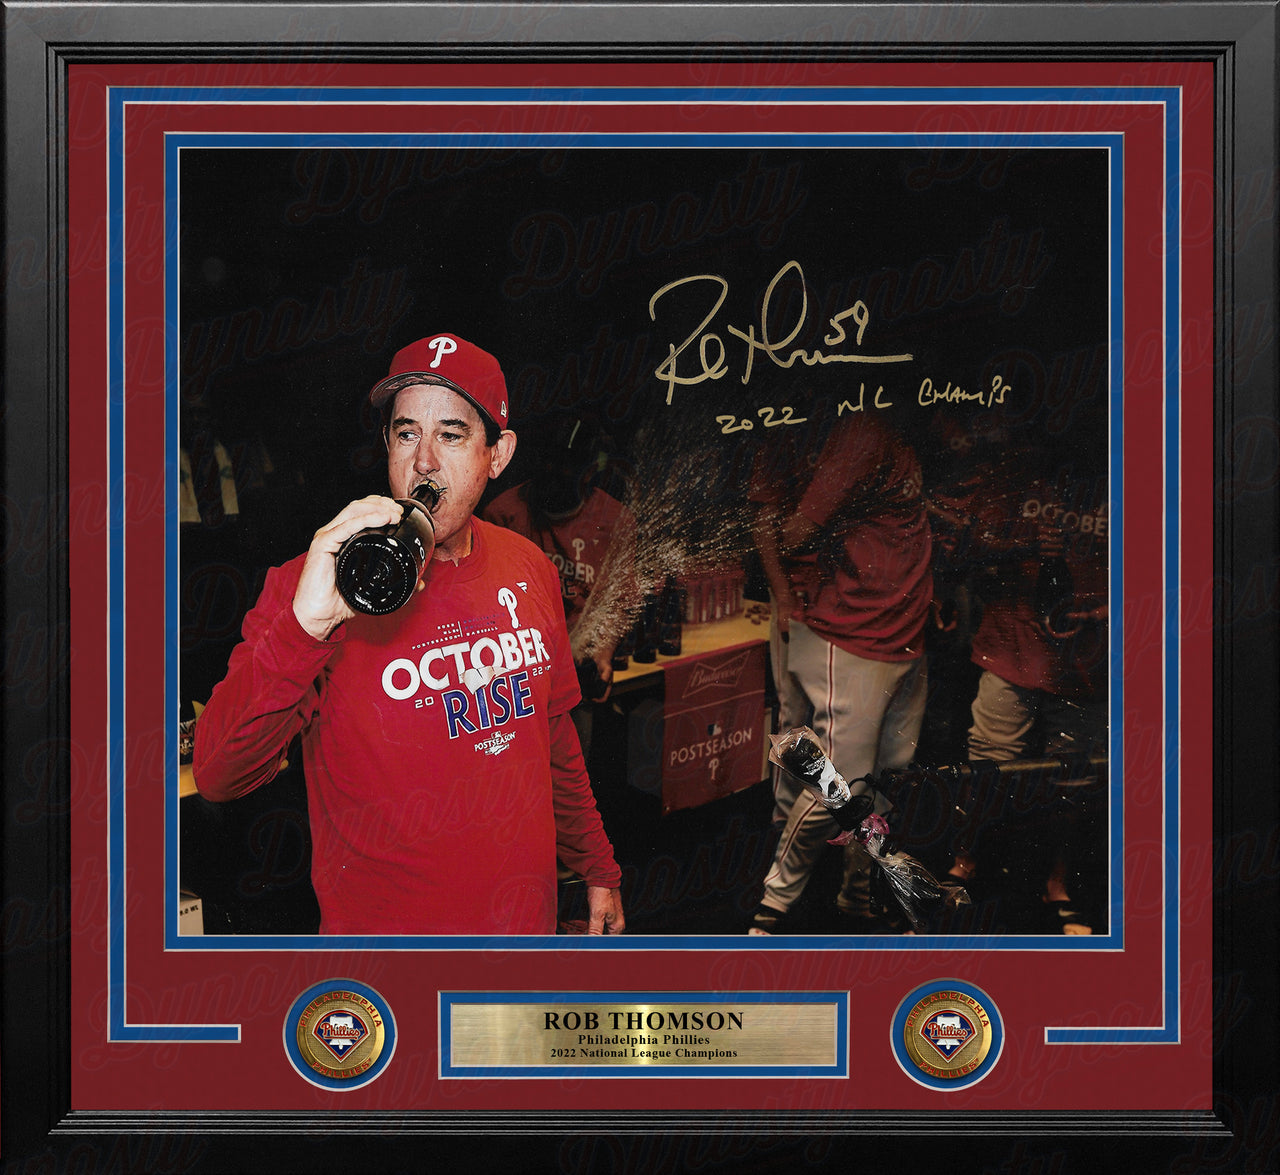 Rob Thomson 2022 NL Champions Locker Room Phillies Autographed 16x20 Framed Photo (NL Champs) - Dynasty Sports & Framing 